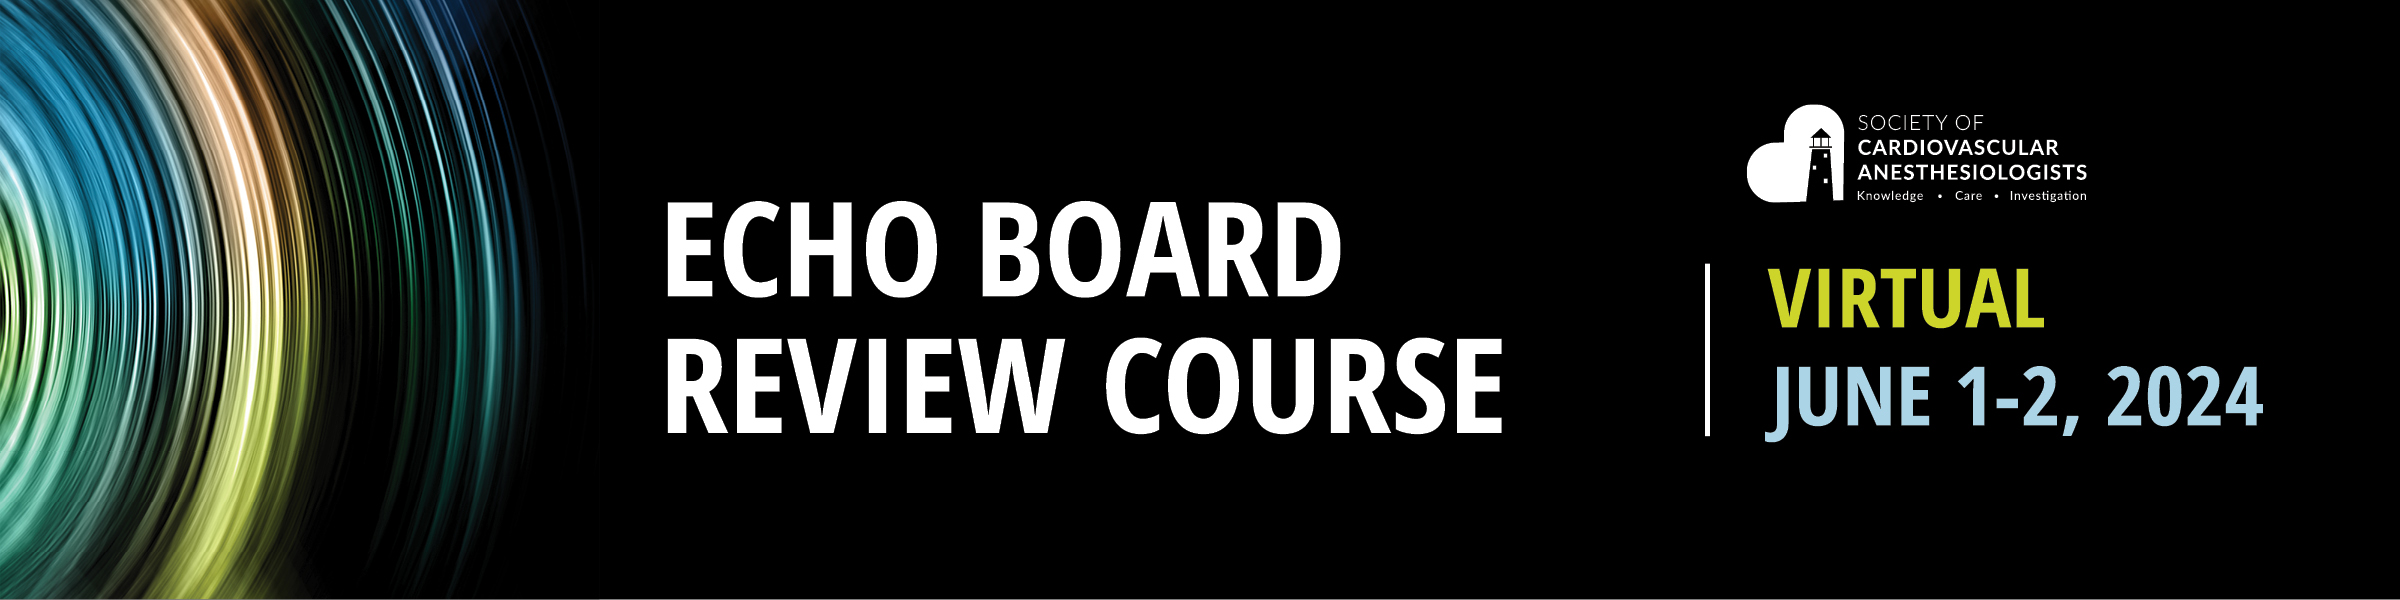 Echo Board Review Course